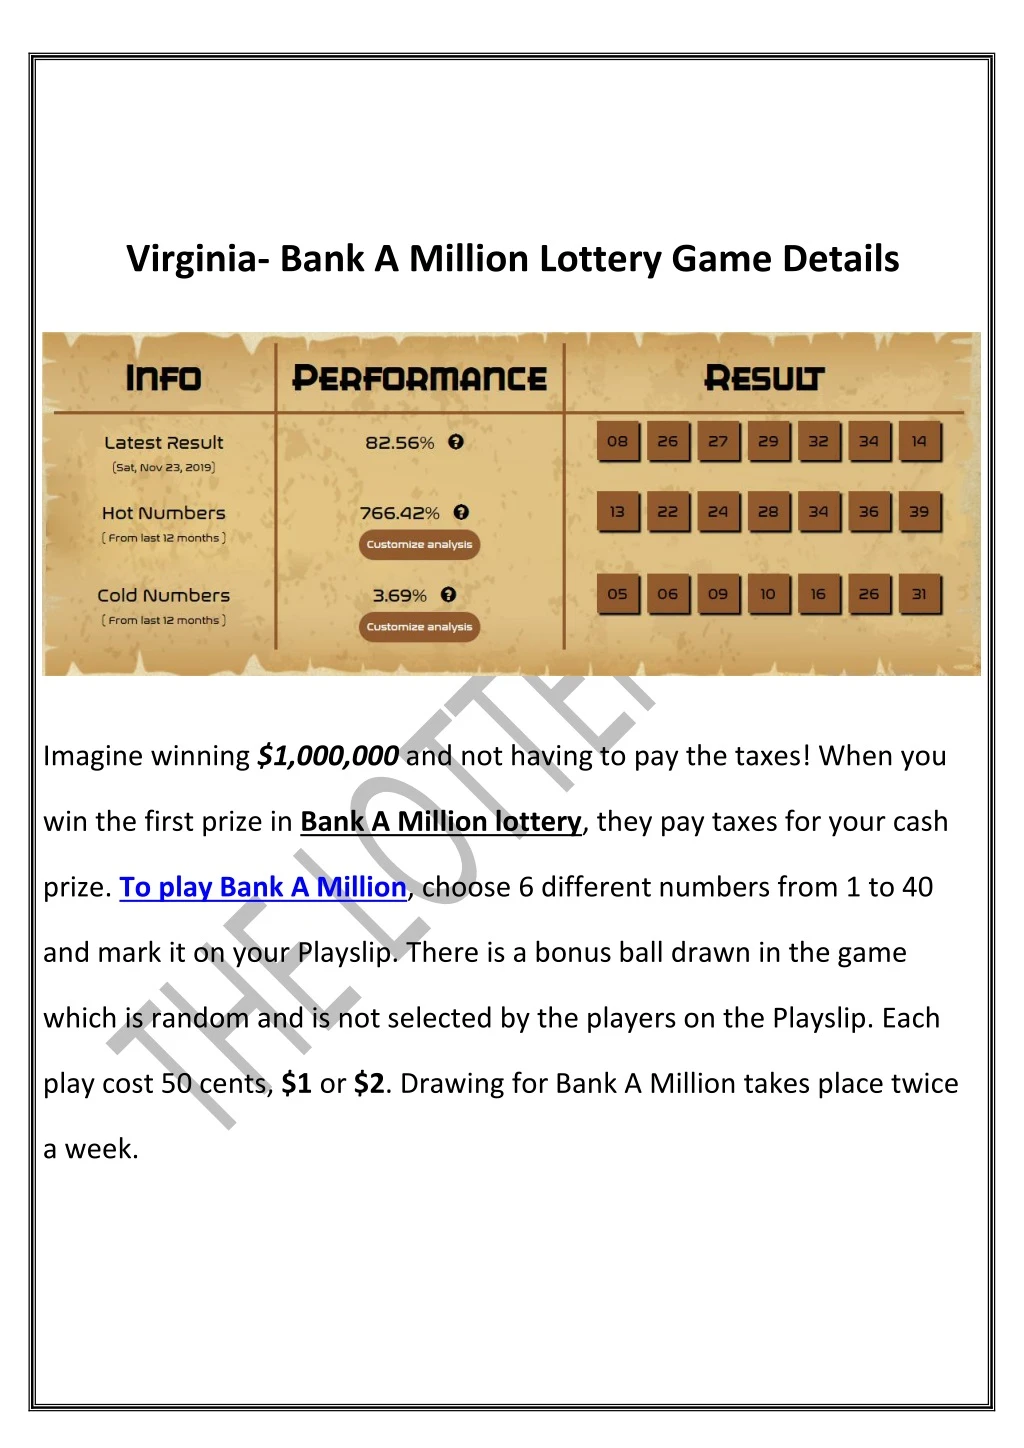 virginia bank a million lottery game details